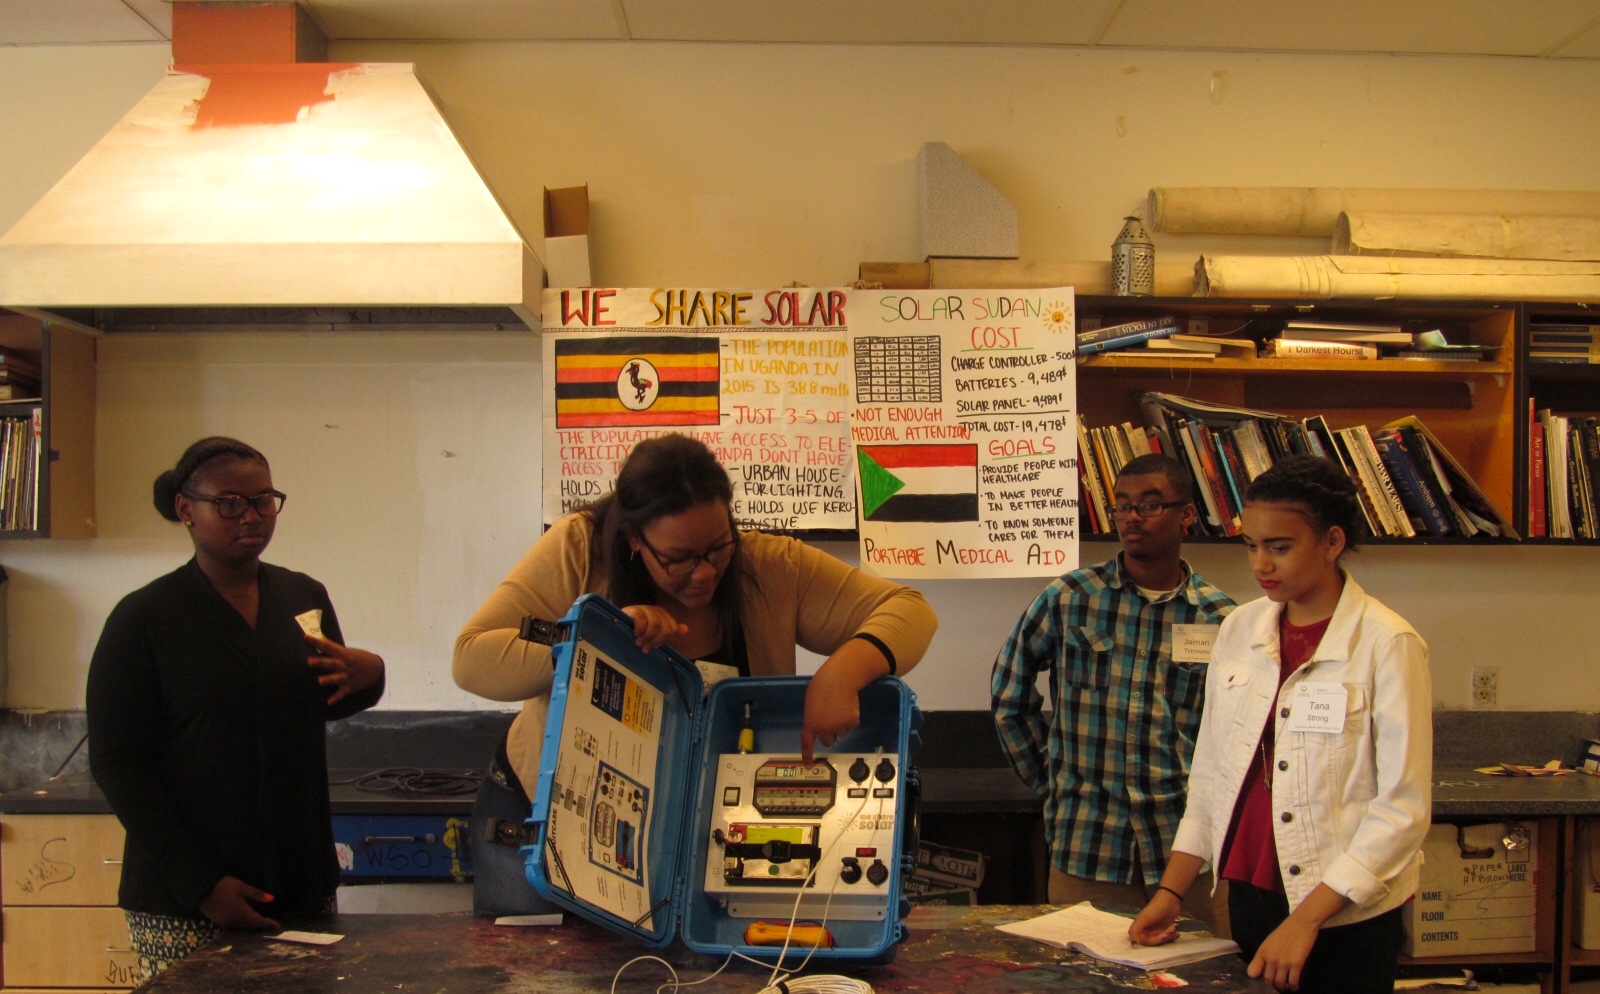 Skyline High School student Daijonne explains the capabilities of the solar suitcase that her group constructed.